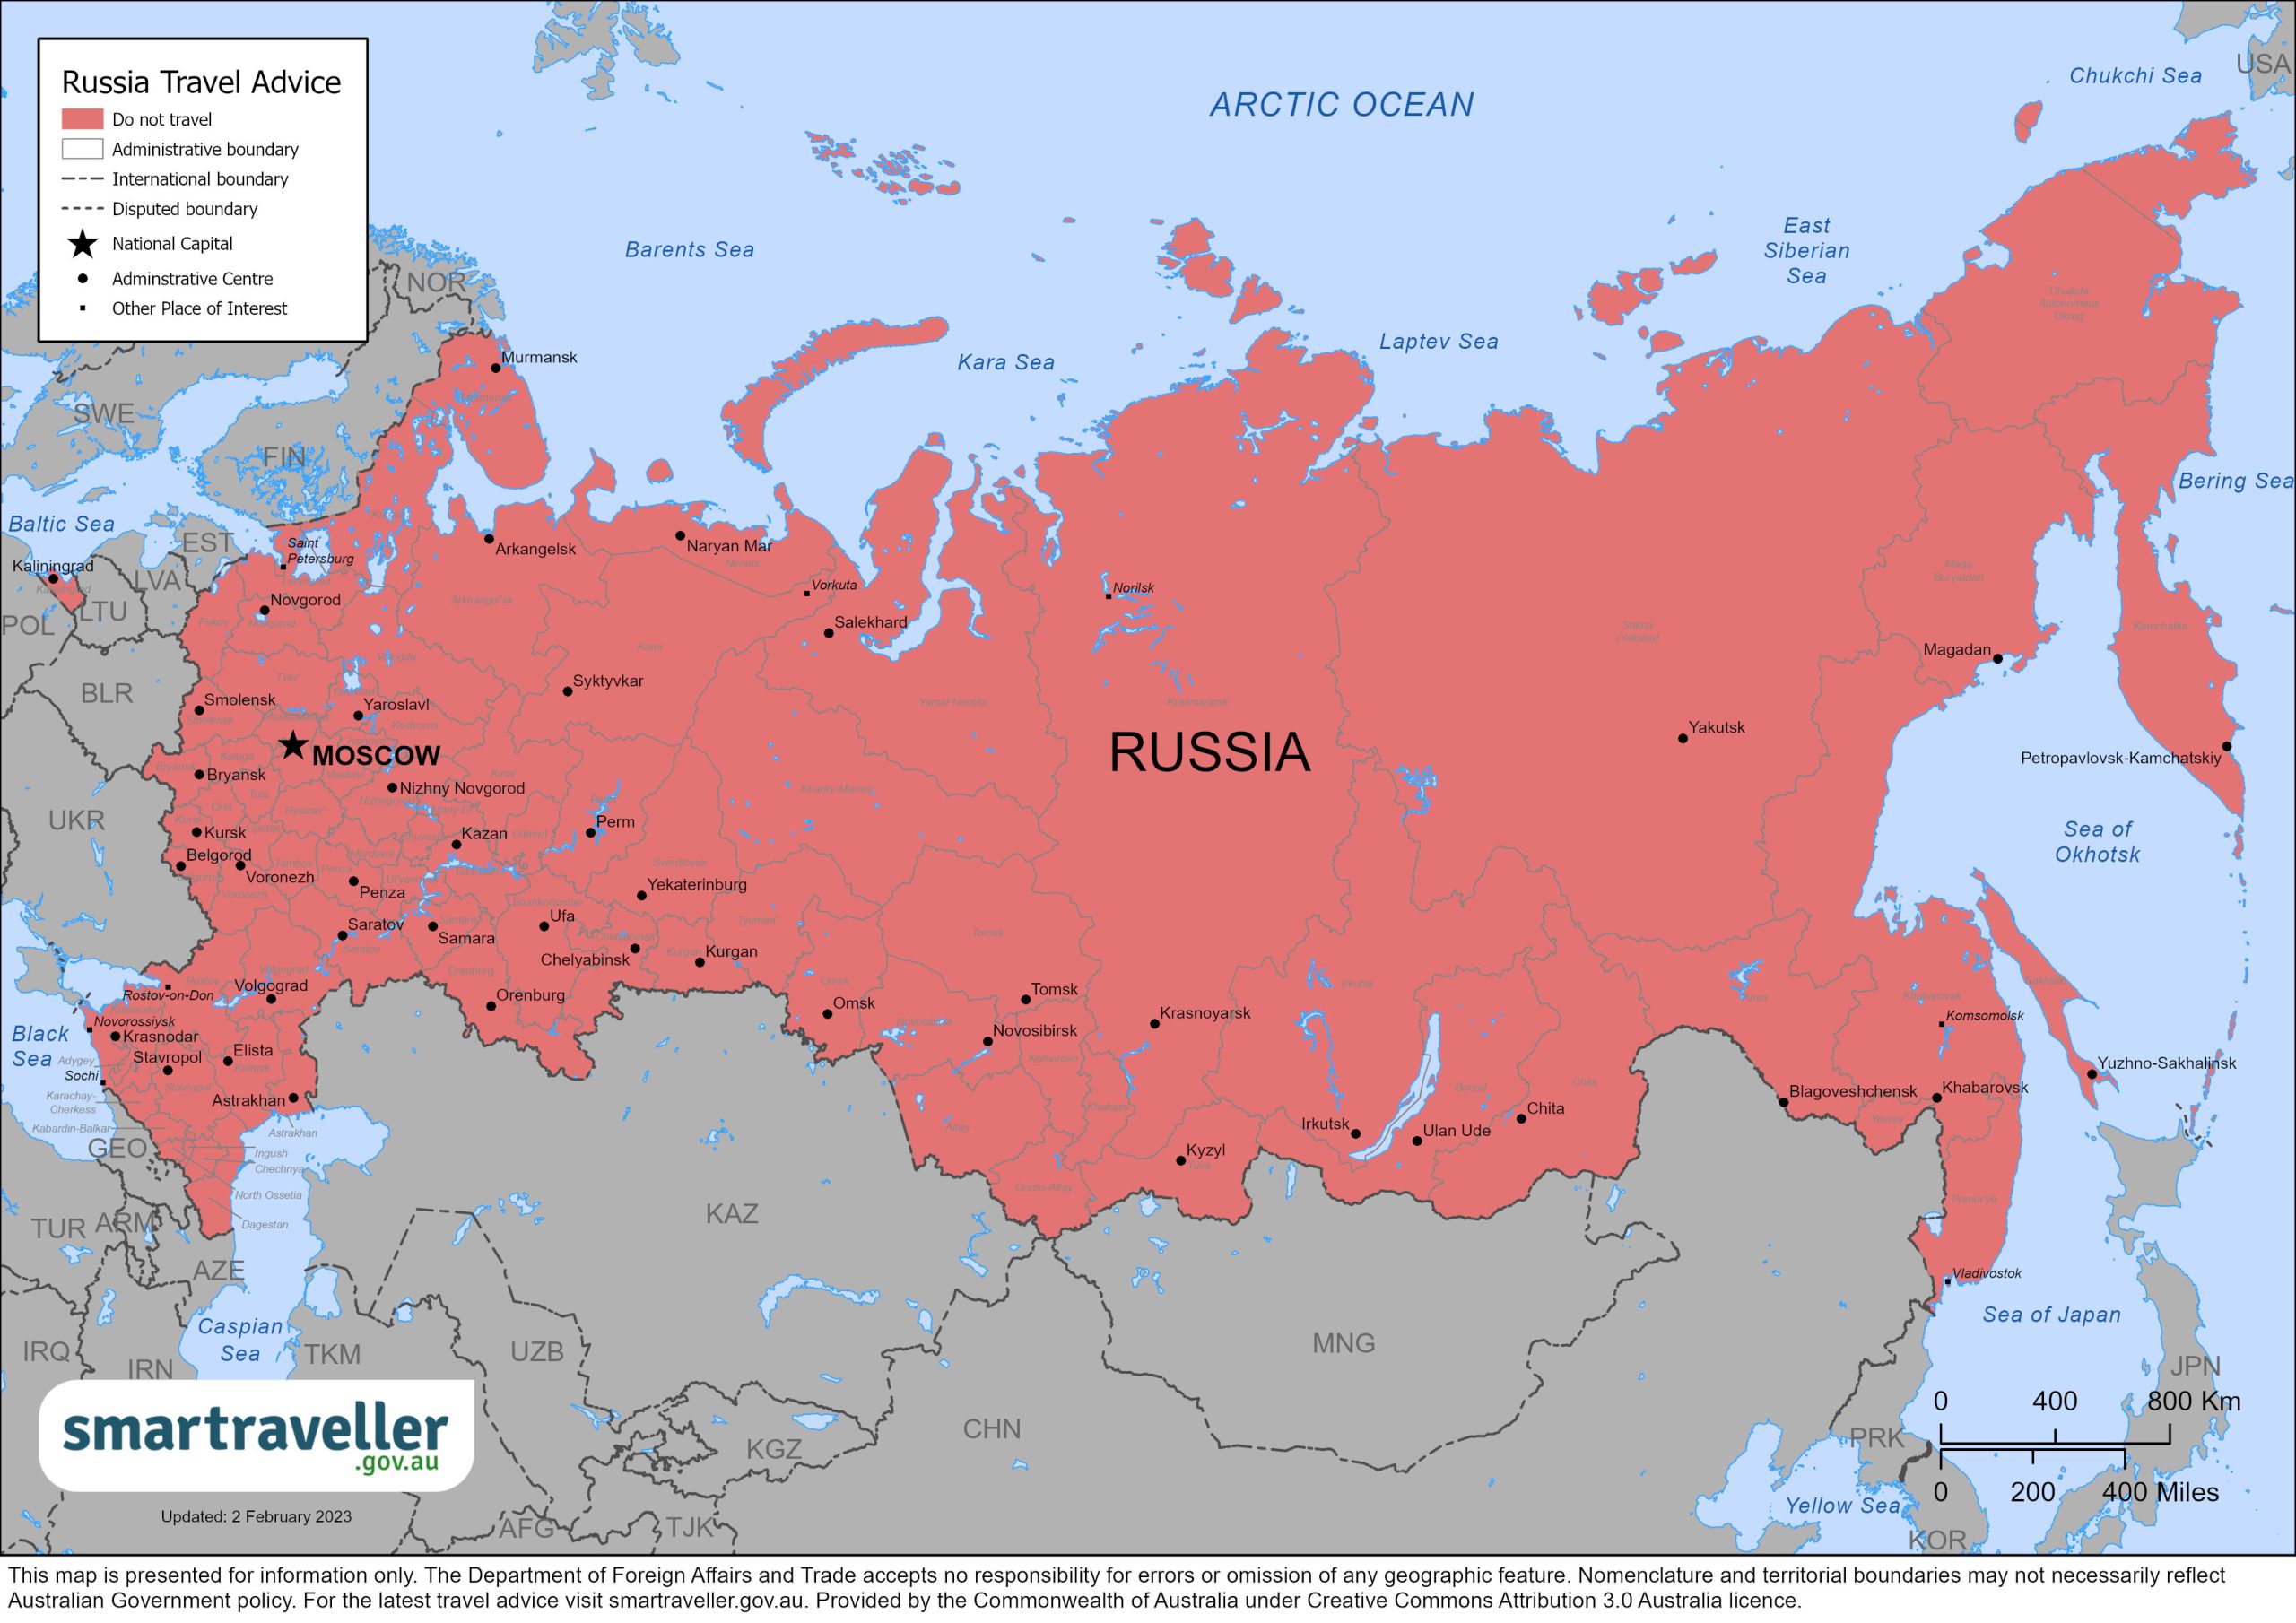 Russia, The World's Largest Country